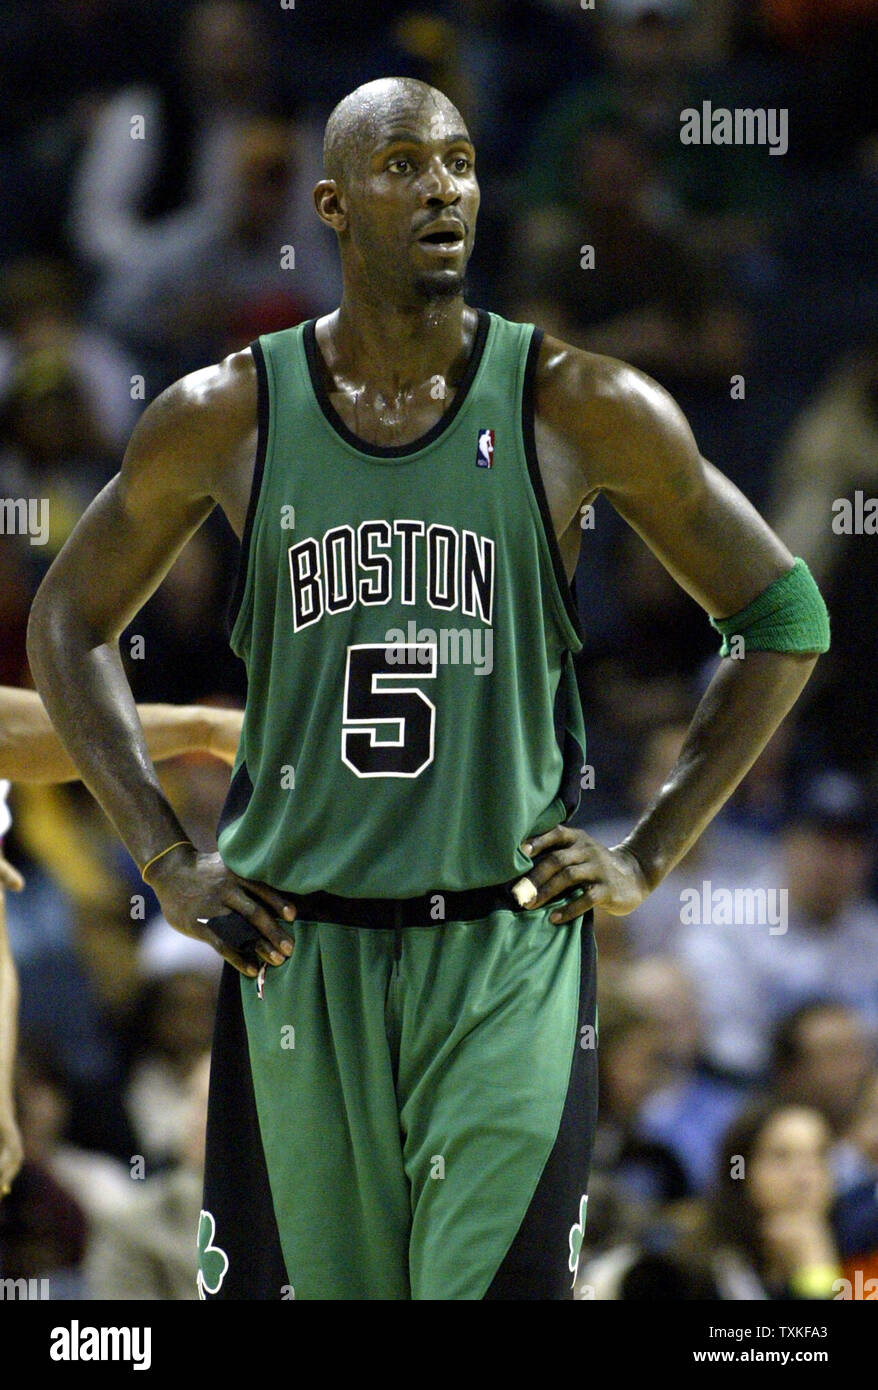 Boston Celtics forward Kevin Garnett walks off the court at the end of regulation as the game against the Charlotte Bobcats goes into overtime in an NBA basketball game in Charlotte, North Carolina on January 6, 2009. Charlotte won 114-106. (UPI Photo/Nell Redmond) Stock Photo